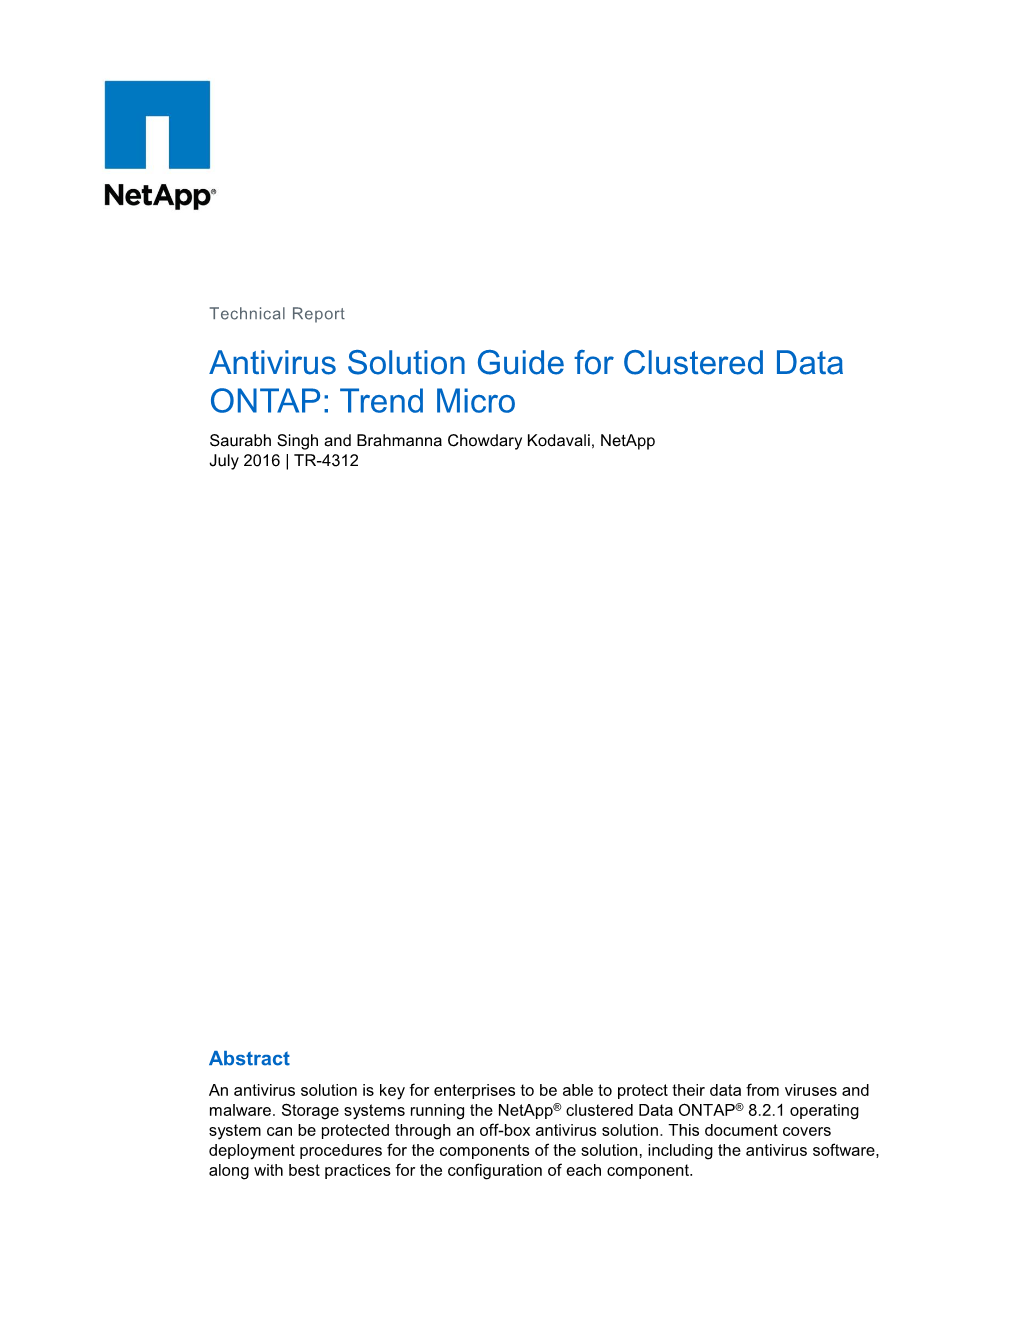 Antivirus Solution Guide for Clustered Data ONTAP: Trend Micro Saurabh Singh and Brahmanna Chowdary Kodavali, Netapp July 2016 | TR-4312